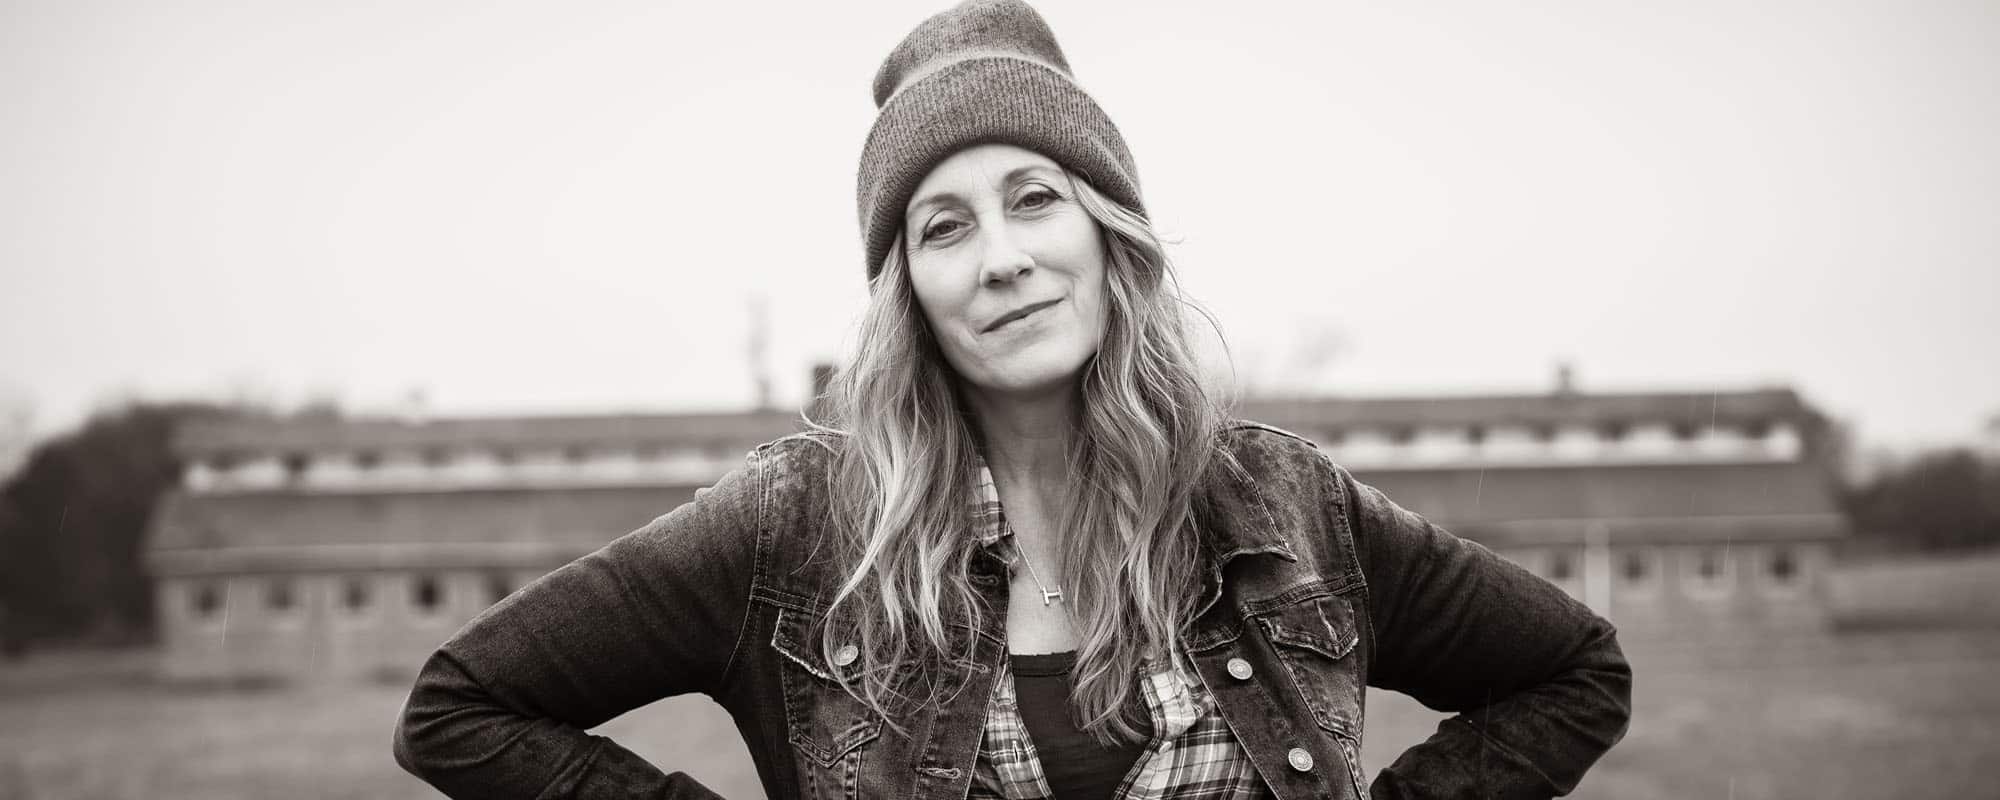 Amy Speace Gets Personal on ‘There Used to Be Horses Here’